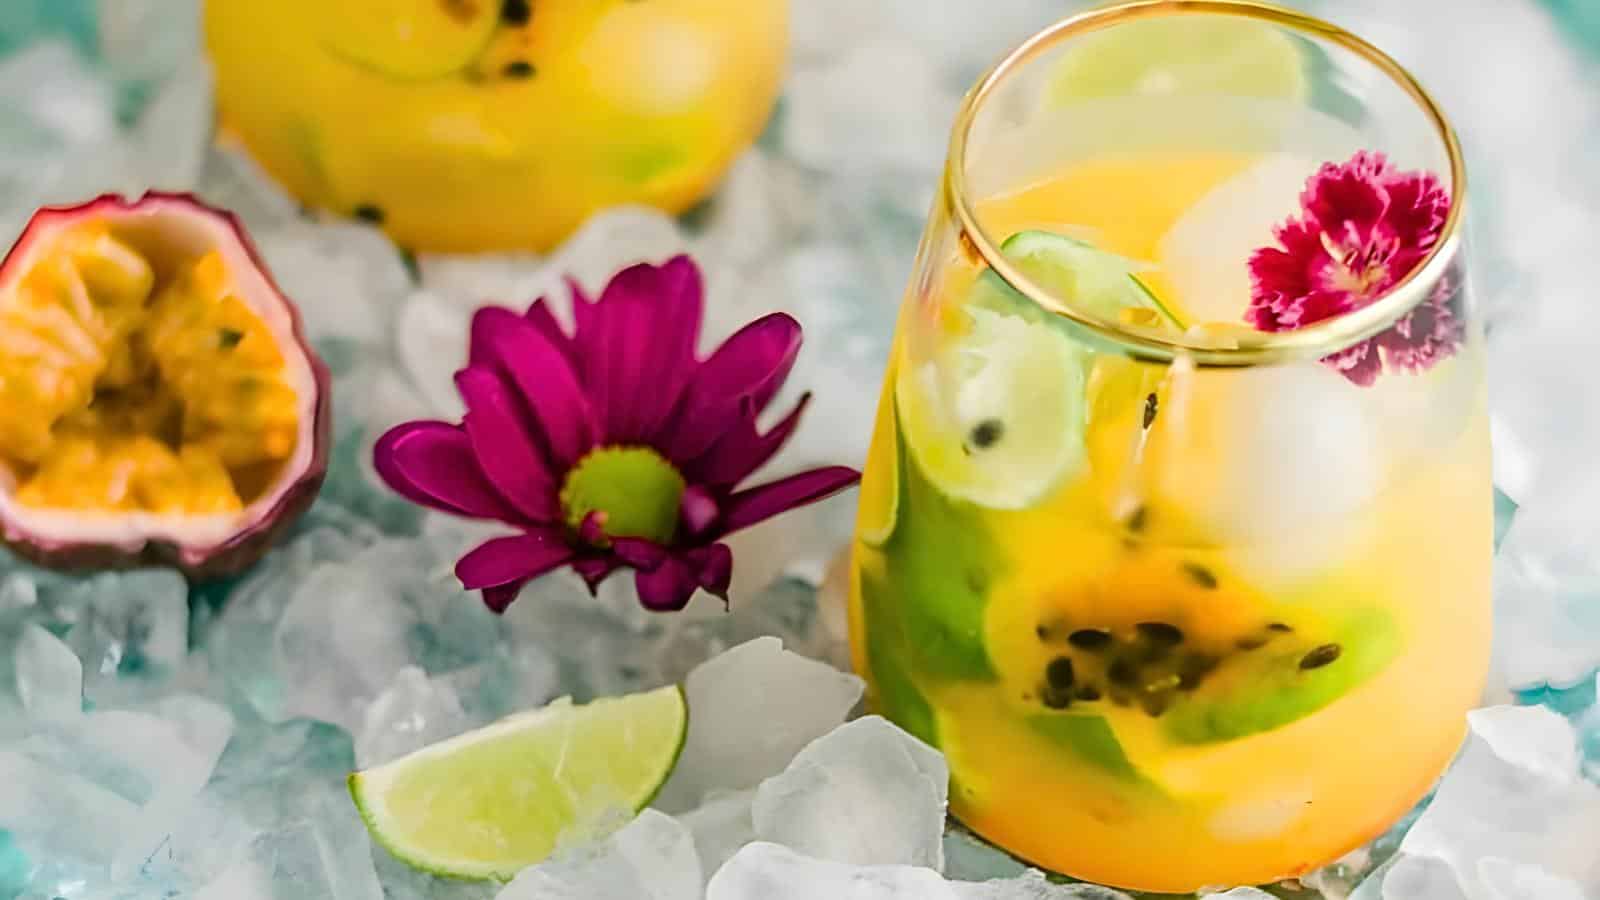 <p>Transport yourself to Brazil with a Passion Fruit Caipirinha. This classic summer cocktail gets a tropical twist with passion fruit, lime, and cachaça. It’s tart, sweet, and incredibly refreshing.<br><strong>Get the Recipe: </strong><a href="https://alatinflair.com/passion-fruit-caipirinha/?utm_source=msn&utm_medium=page&utm_campaign=msn" rel="noopener">Brazilian Passion Fruit Caipirinha Cocktail</a></p>